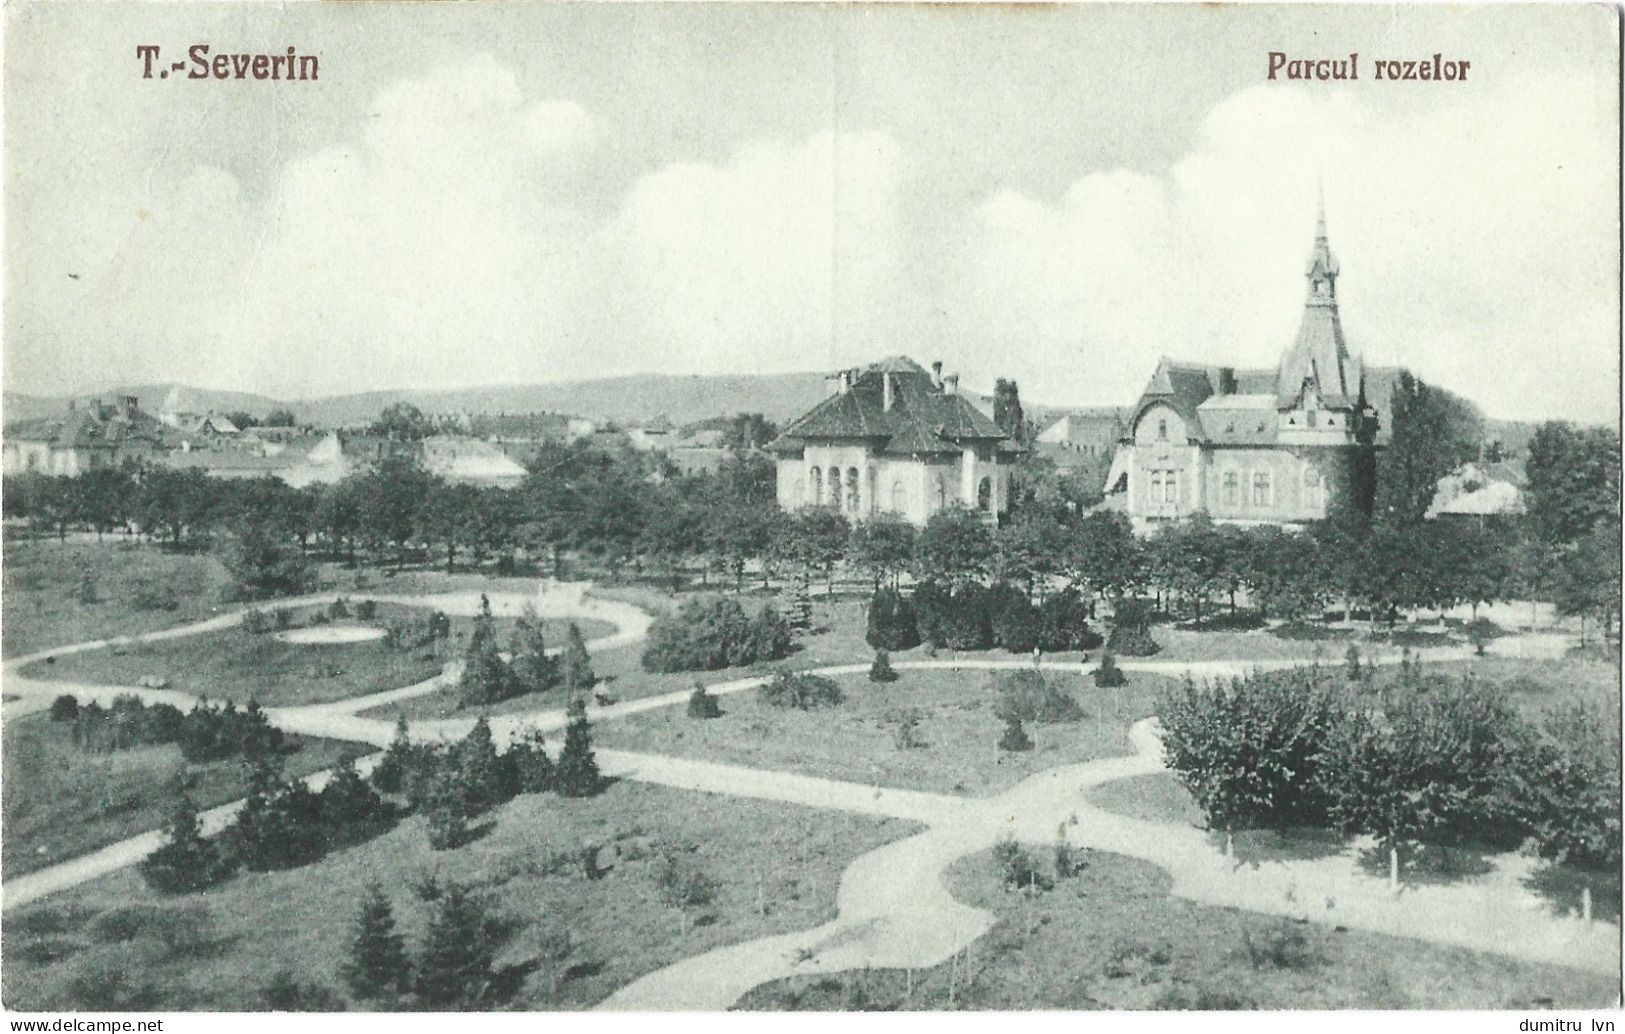 ROMANIA 1928 TURNU-SEVERIN - THE PARK OF ROSES, BUILDINGS, ARCHITECTURE, PEOPLE - Roumanie